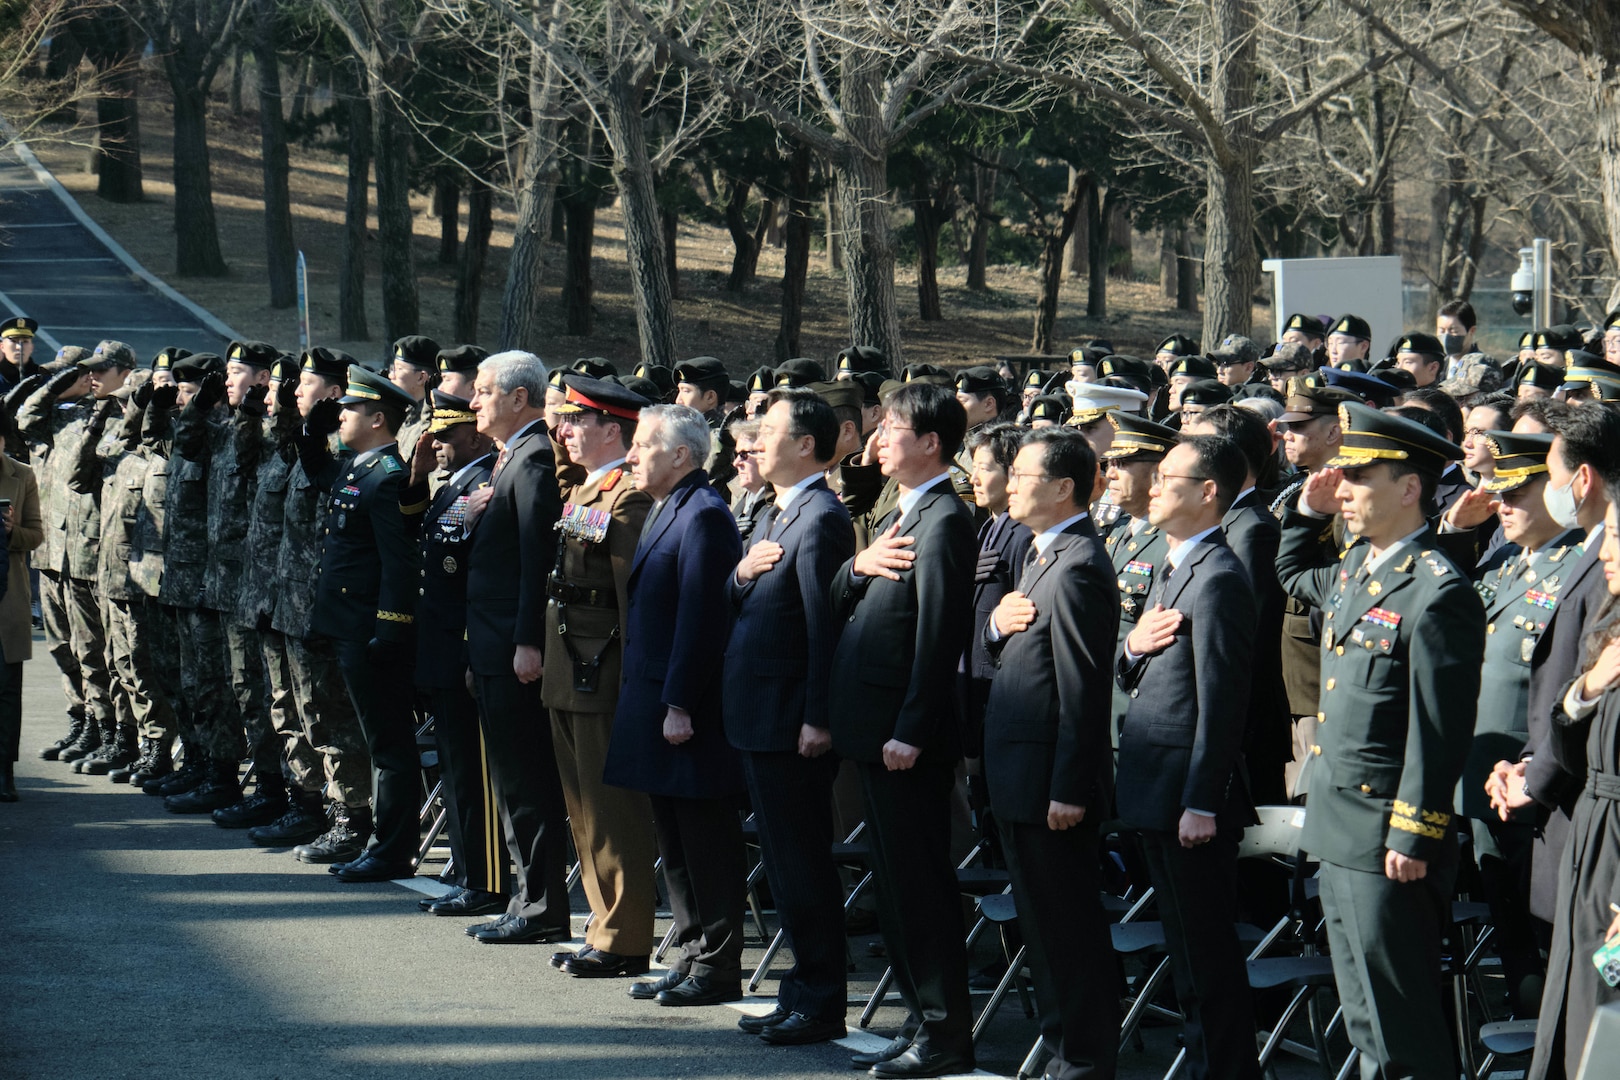 U.S. and Republic of Korea military and government officials conduct a repatriation ceremony at the Ministry of National Defense Agency for Killed in Action Recovery Identification (MAKRI)  headquarters in Seoul, Feb. 23, 2023.  Accepting the remains on behalf of the U.S., was Defense POW/MIA Accounting Agency Director, Kelly McKeague. The remains will be transported to the DPAA laboratory for further scientific analysis. There are currently more than 7,500 unaccounted for American service members from the Korean War. (U.S. Army photo by Sgt. 1st Class Corey Idleburg)